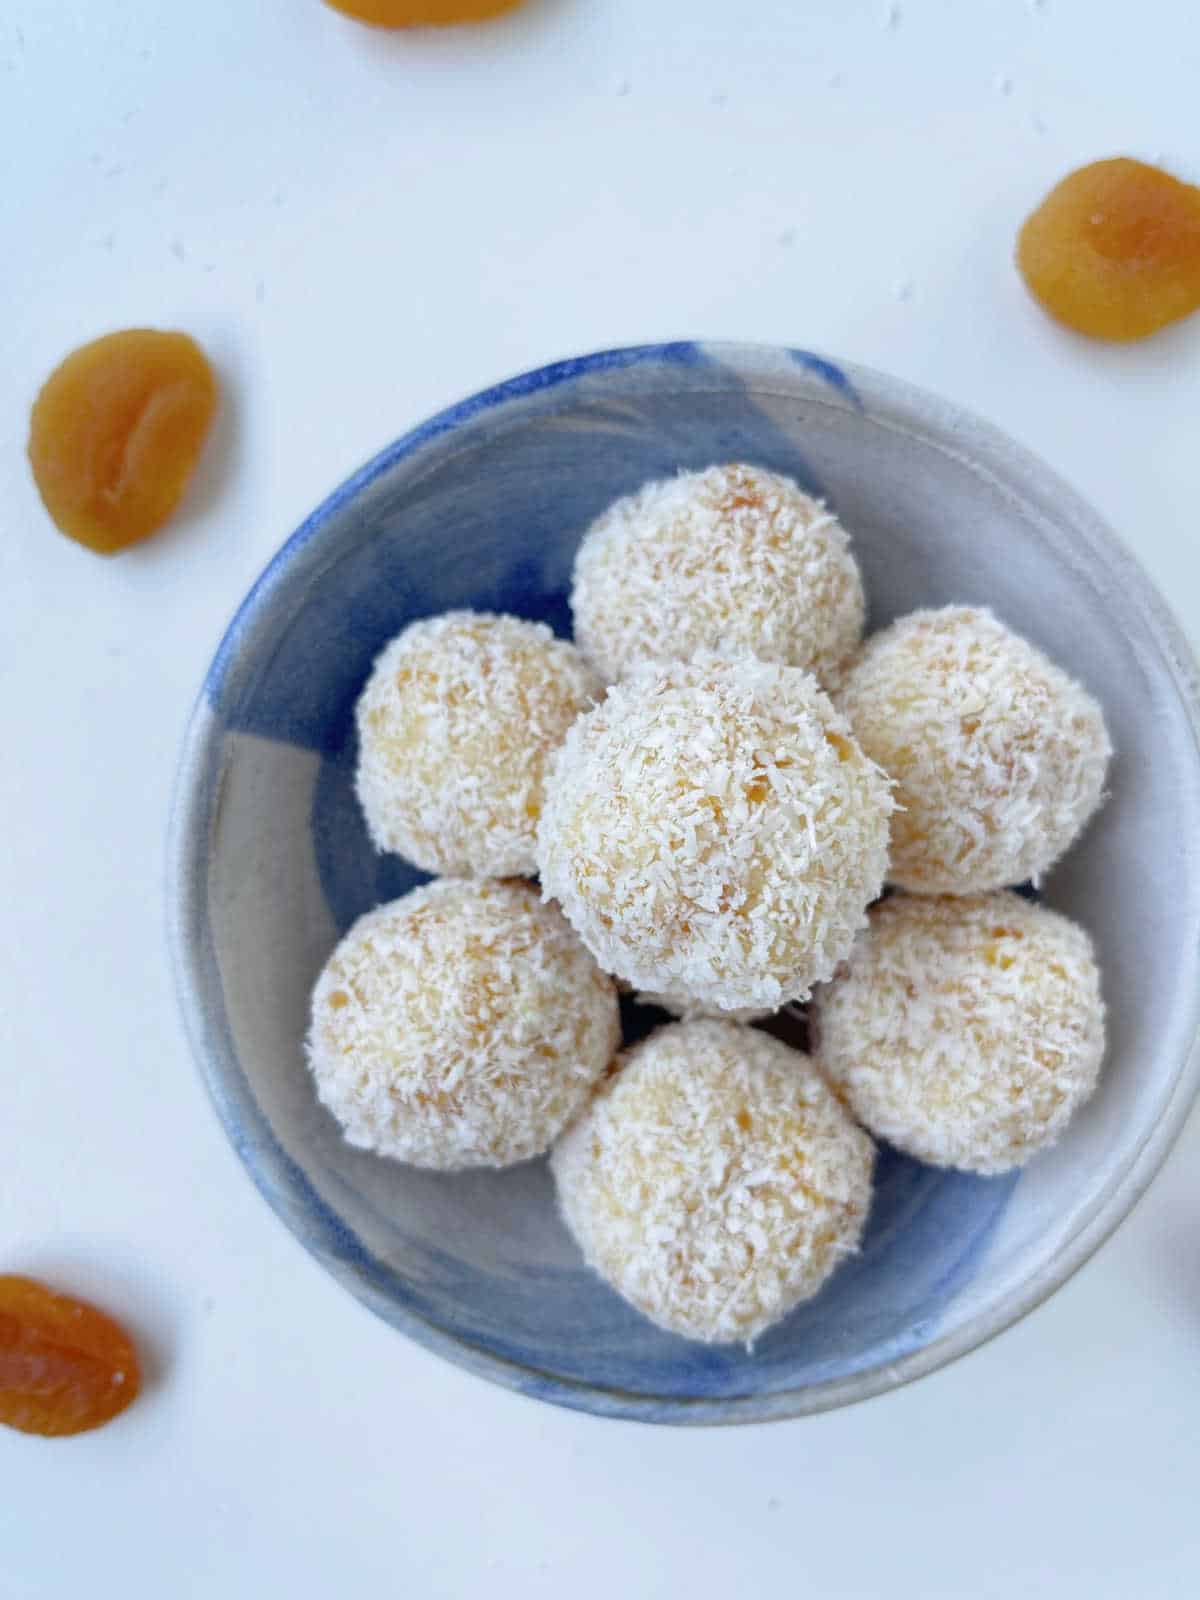 Apricot and coconut balls in a blue and cream bowl with apricots in the background.